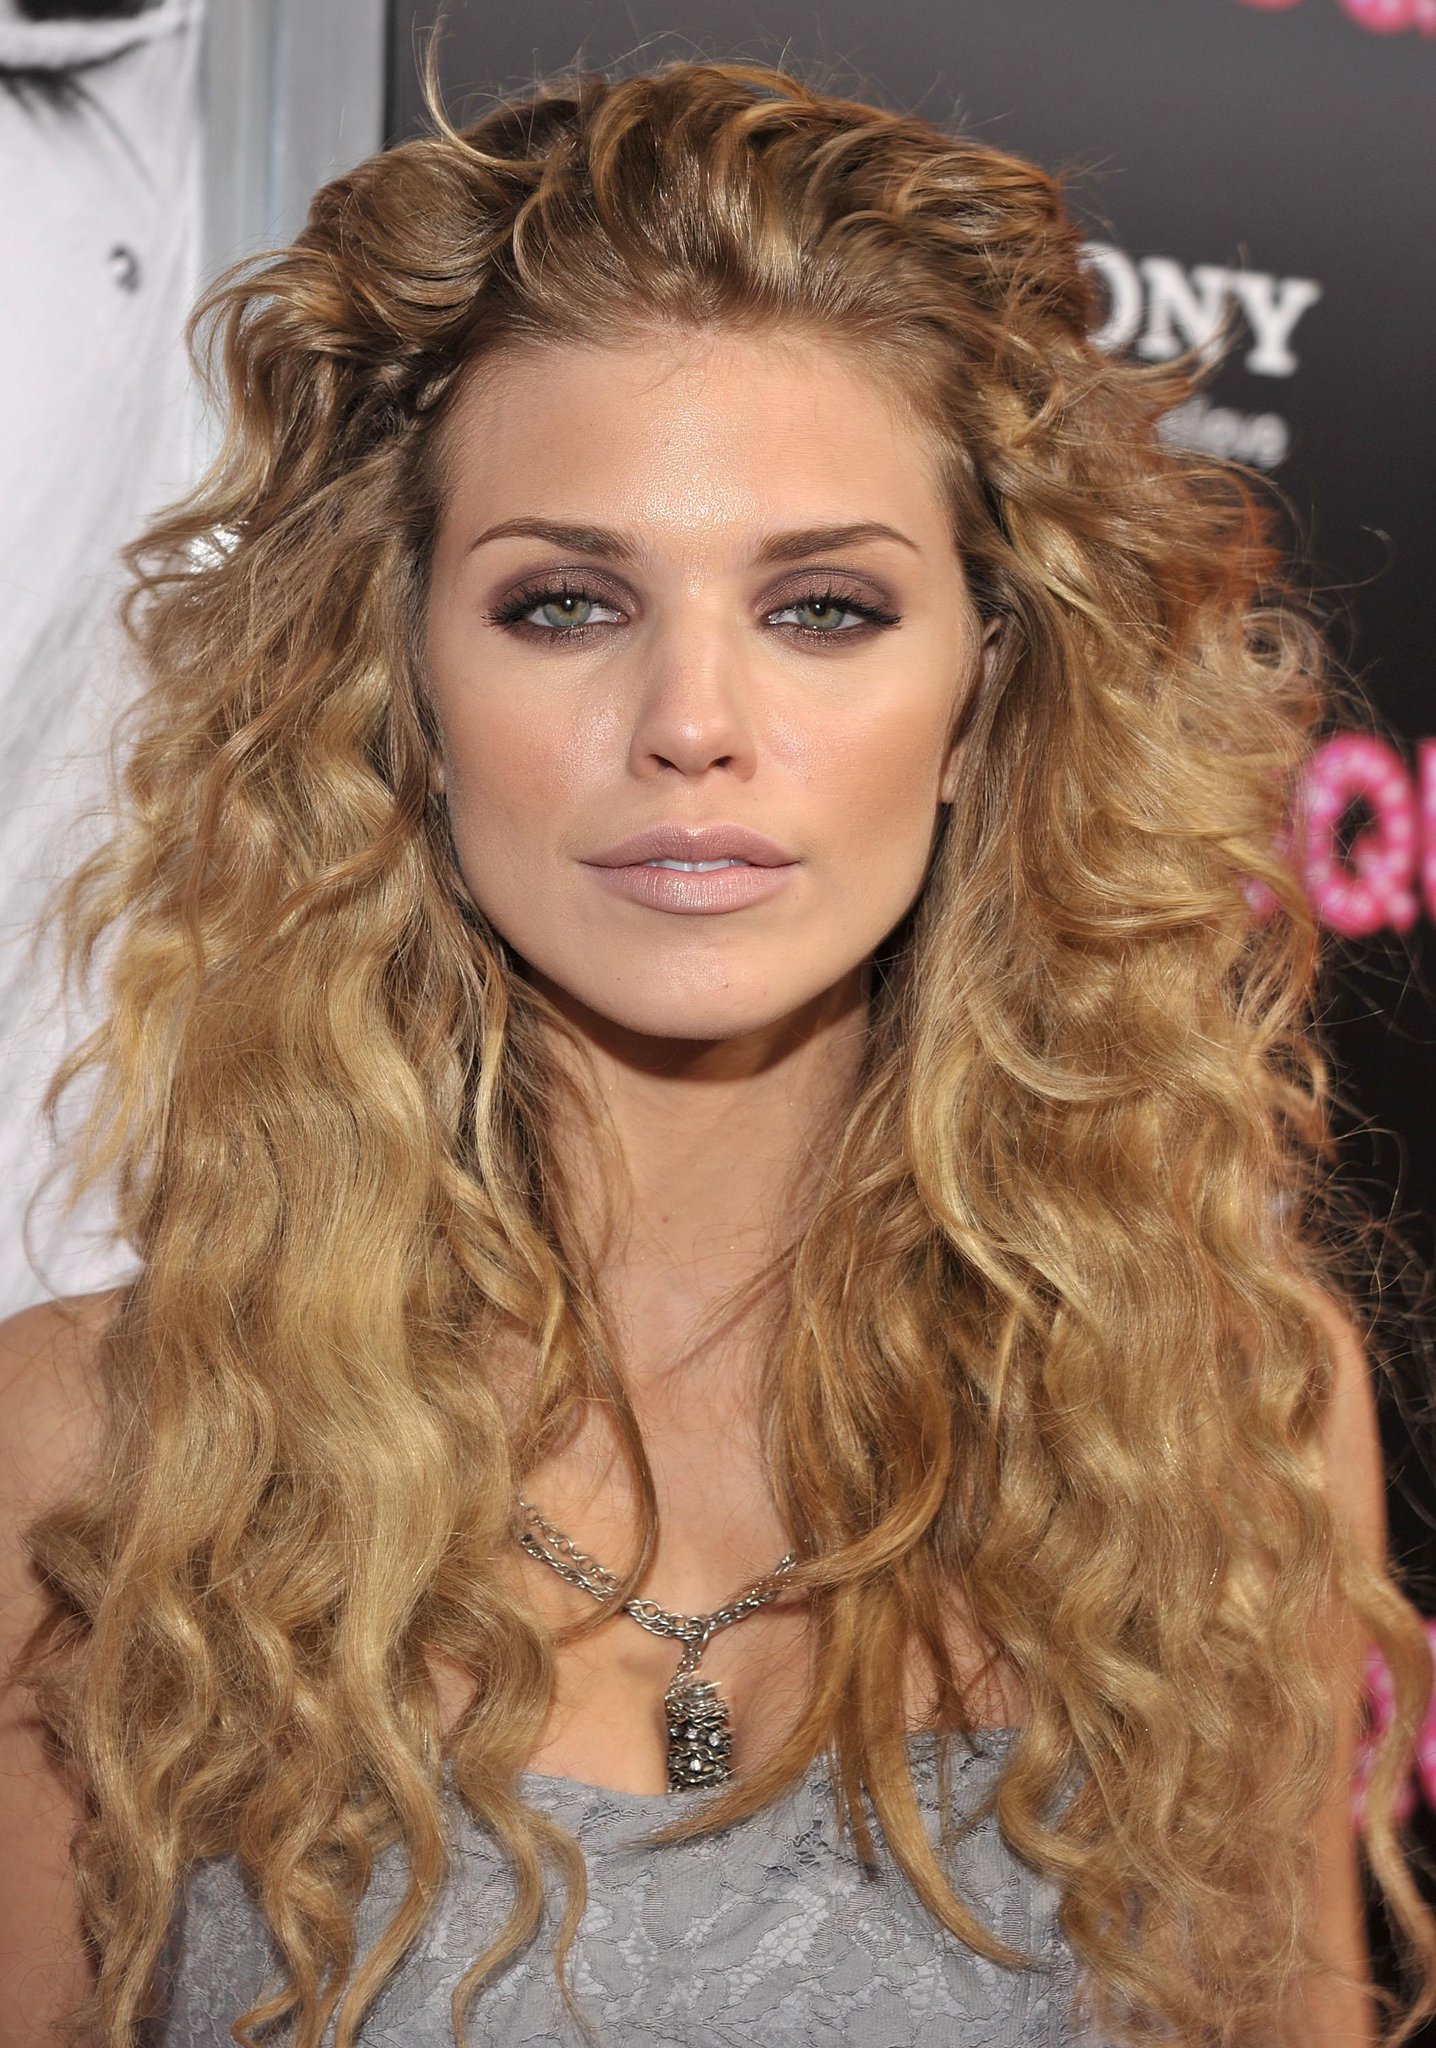 Happy Birthday to AnnaLynne McCord, who turns 28 today! 